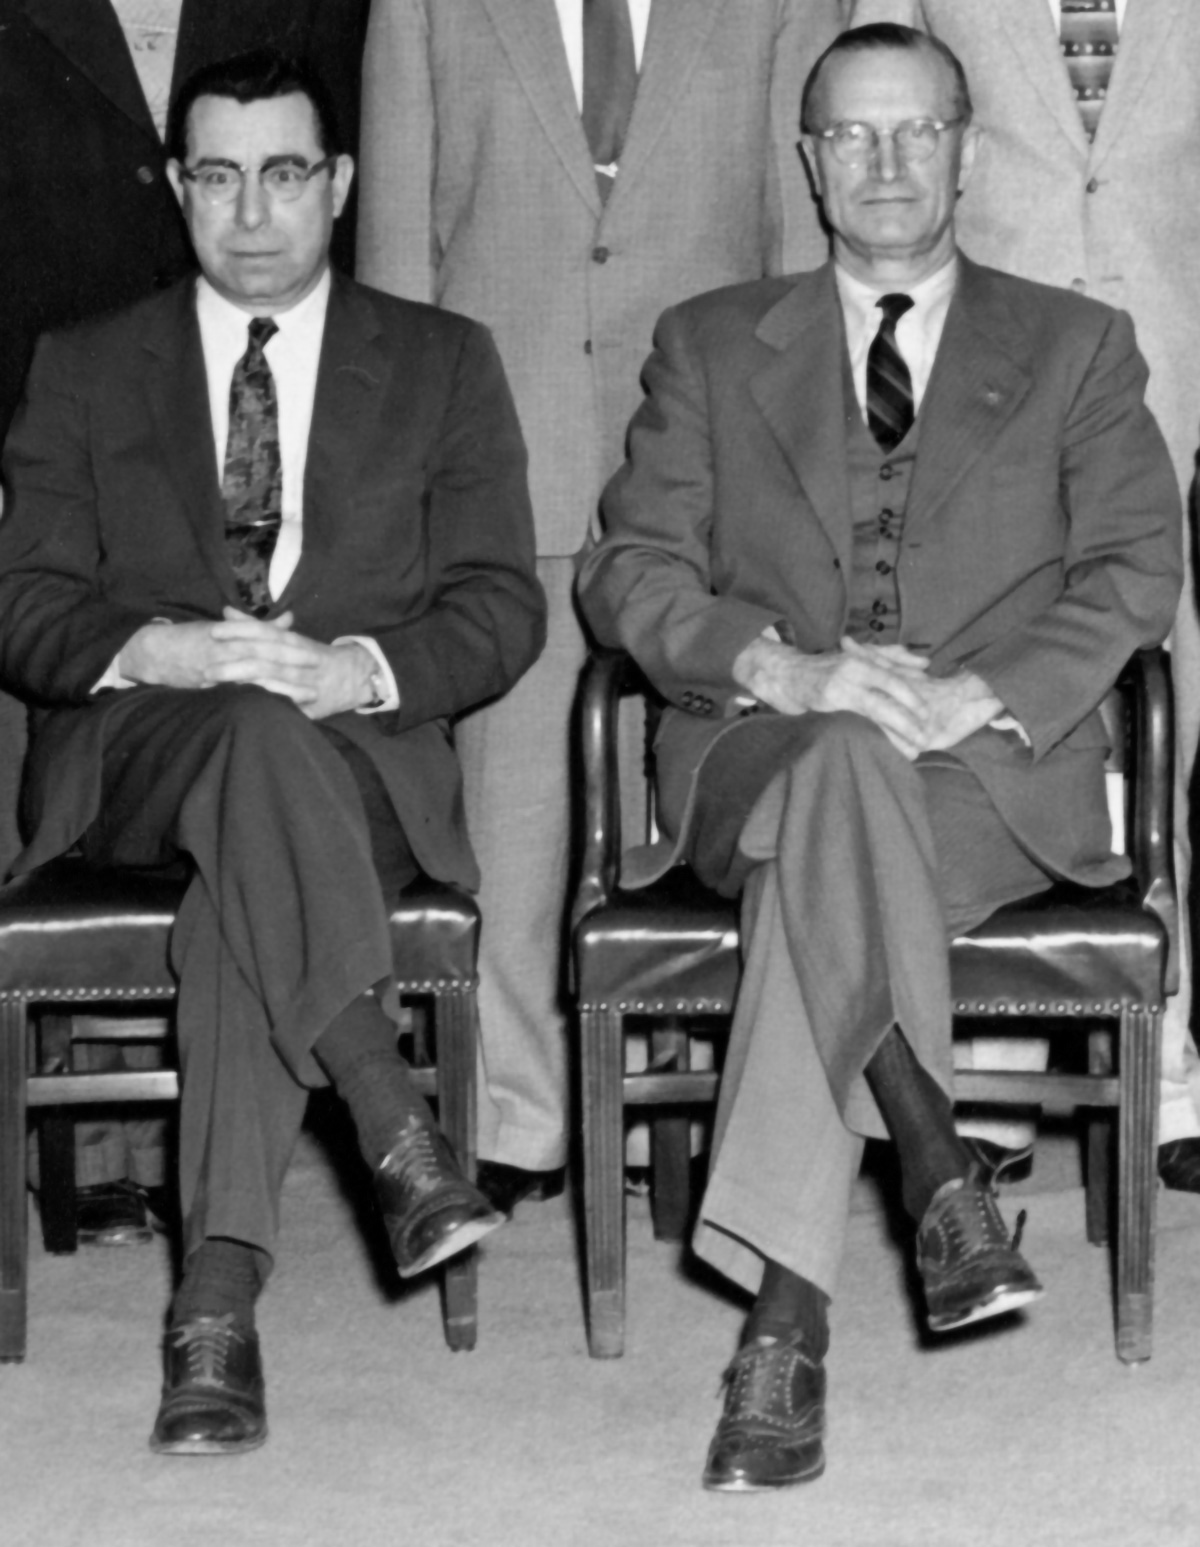 Image. Charles D.  “Cap” Curtiss, Commissioner of Public Roads (right), with Assistant to the  Commissioner Francis C. "Frank" Turner in 1956.